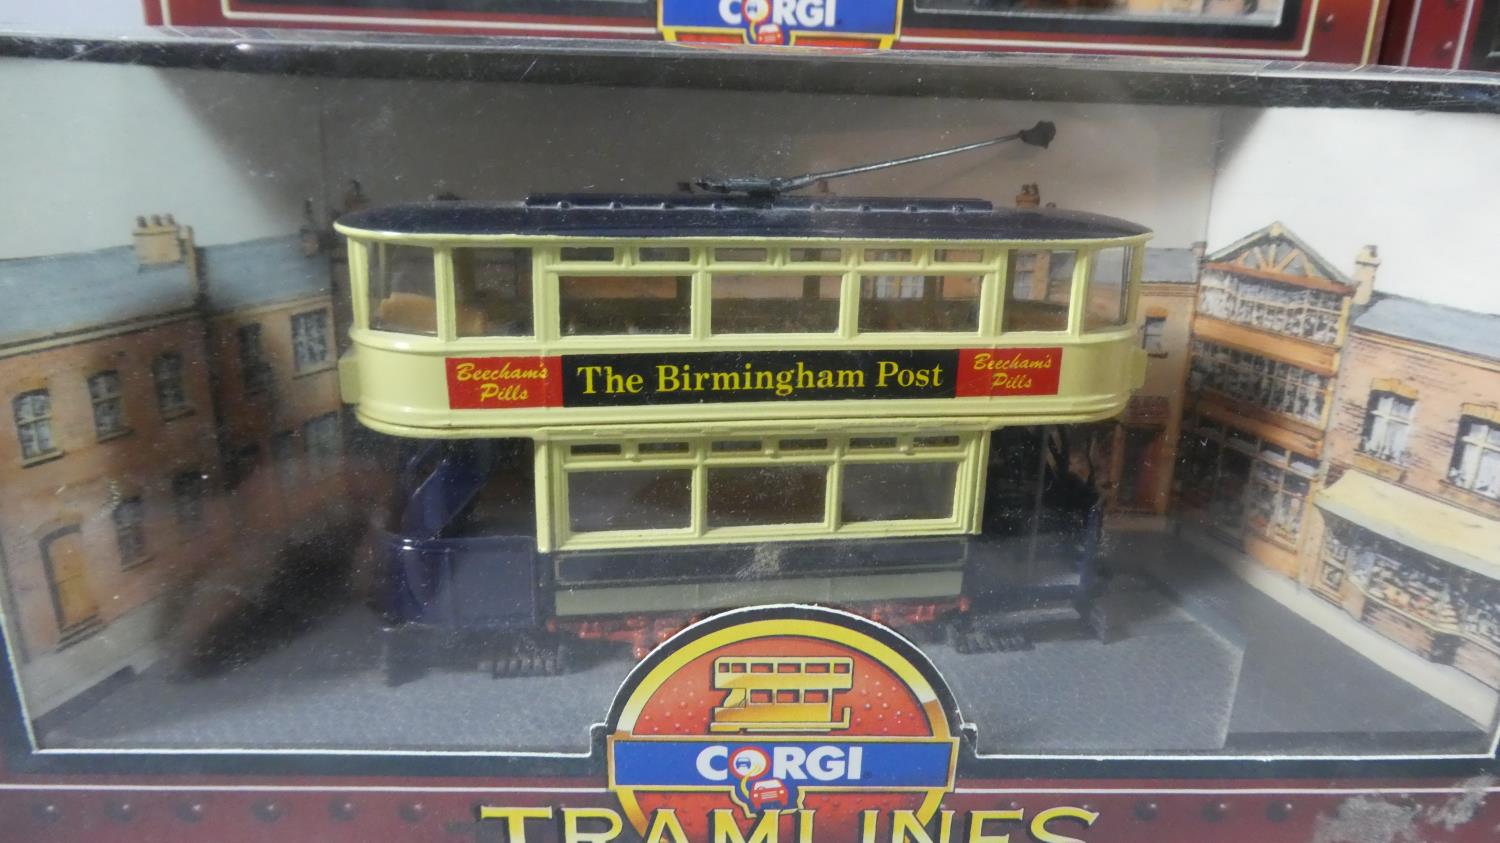 A Collection of Four Boxed Corgi Tramlines and One Original Omnibus to include C99012 Sheffield - Image 2 of 6